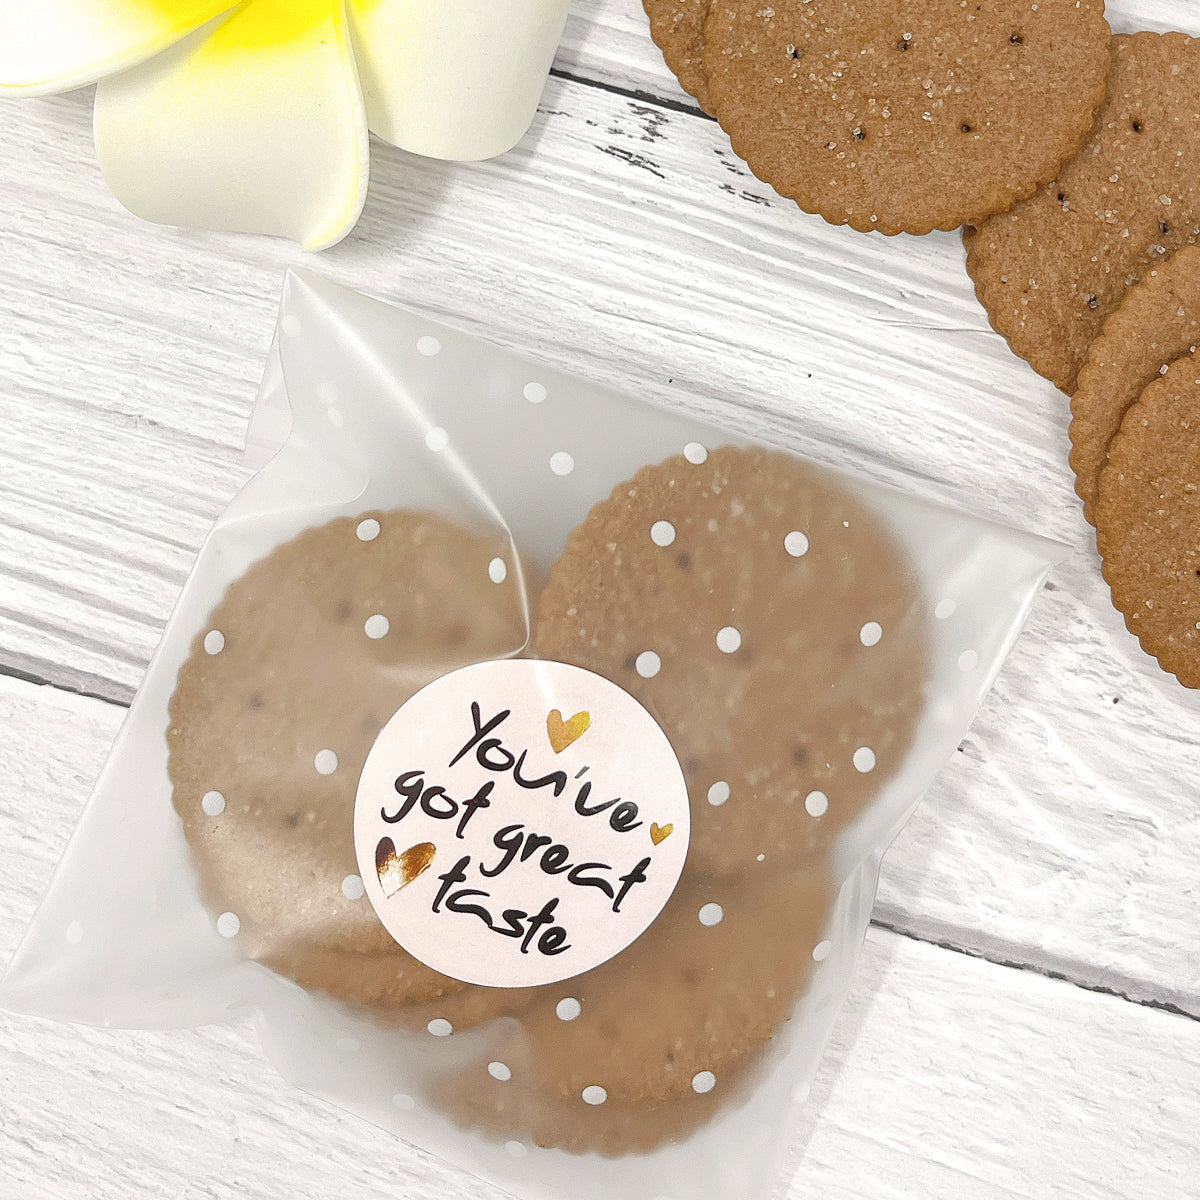 Shop OPP Cellophane Self-Adhesive Cookie Bags for Jewelry Making -  PandaHall Selected